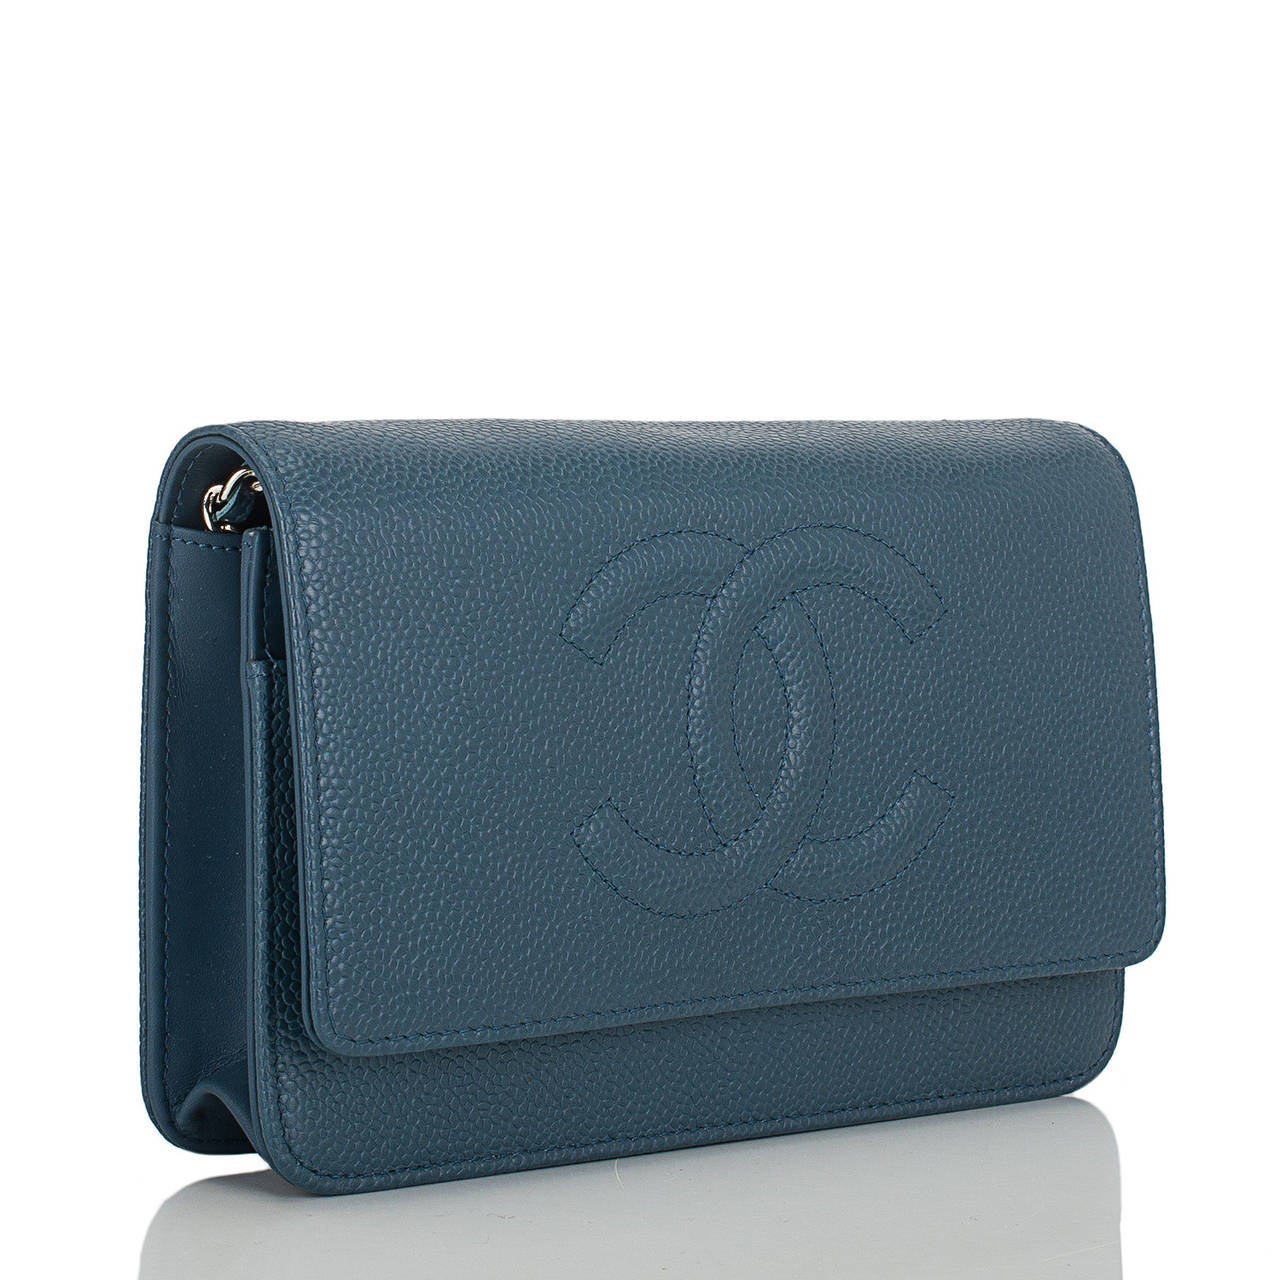 This Timeless Wallet On Chain in a rich slate blue color caviar leather features a front flap with tonal stitched large CC, hidden snap closure, expandable sides and bottom, and interwoven silver tone chain link and blue leather shoulder/crossbody